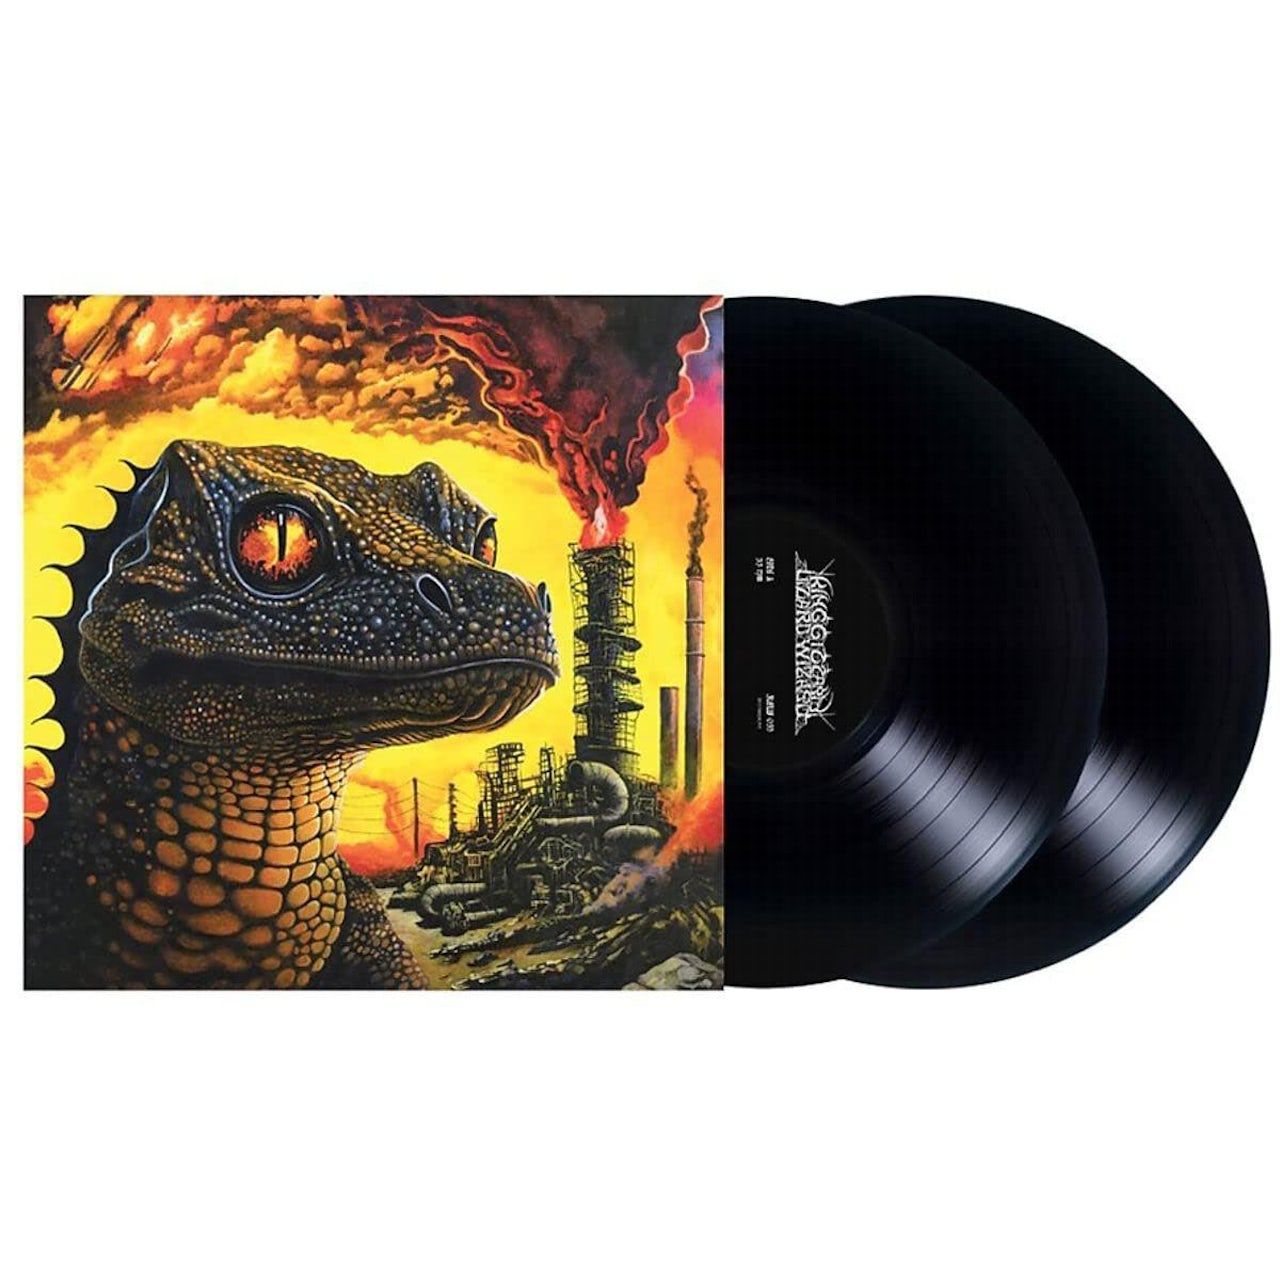 0842812189524, Виниловая пластинка King Gizzard & The Lizard Wizard, Petrodragonic Apocalypse; Or, Dawn Of Eternal Night: An Annihilation Of Planet Earth And The Beginning Of Merciless Damnation (coloured) виниловая пластинка king gizzard